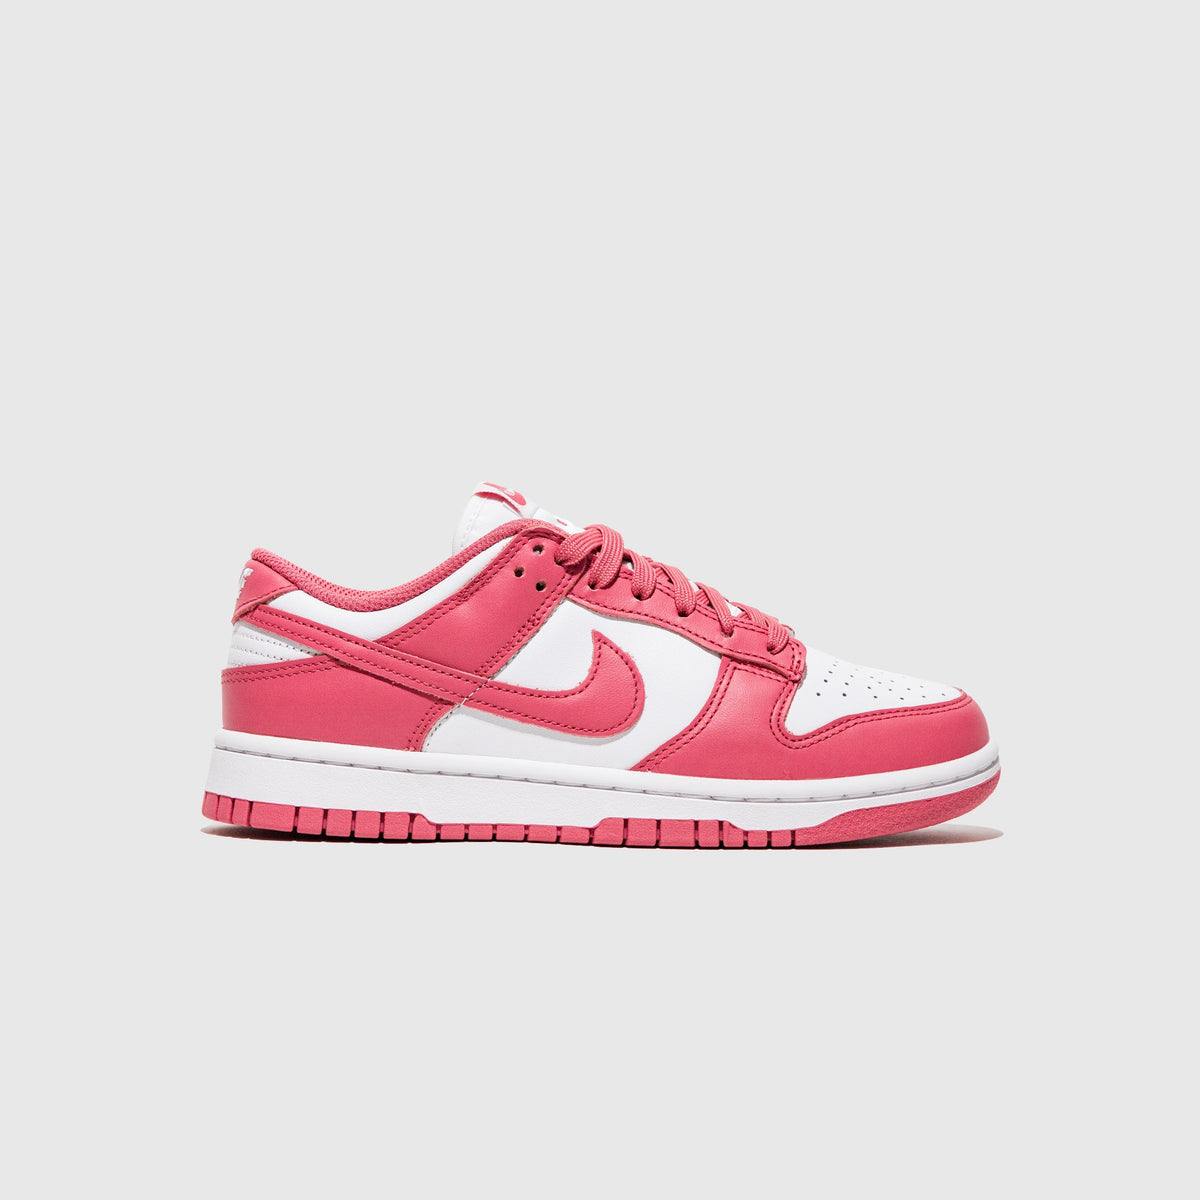 NIKE WMNS DUNK LOW 